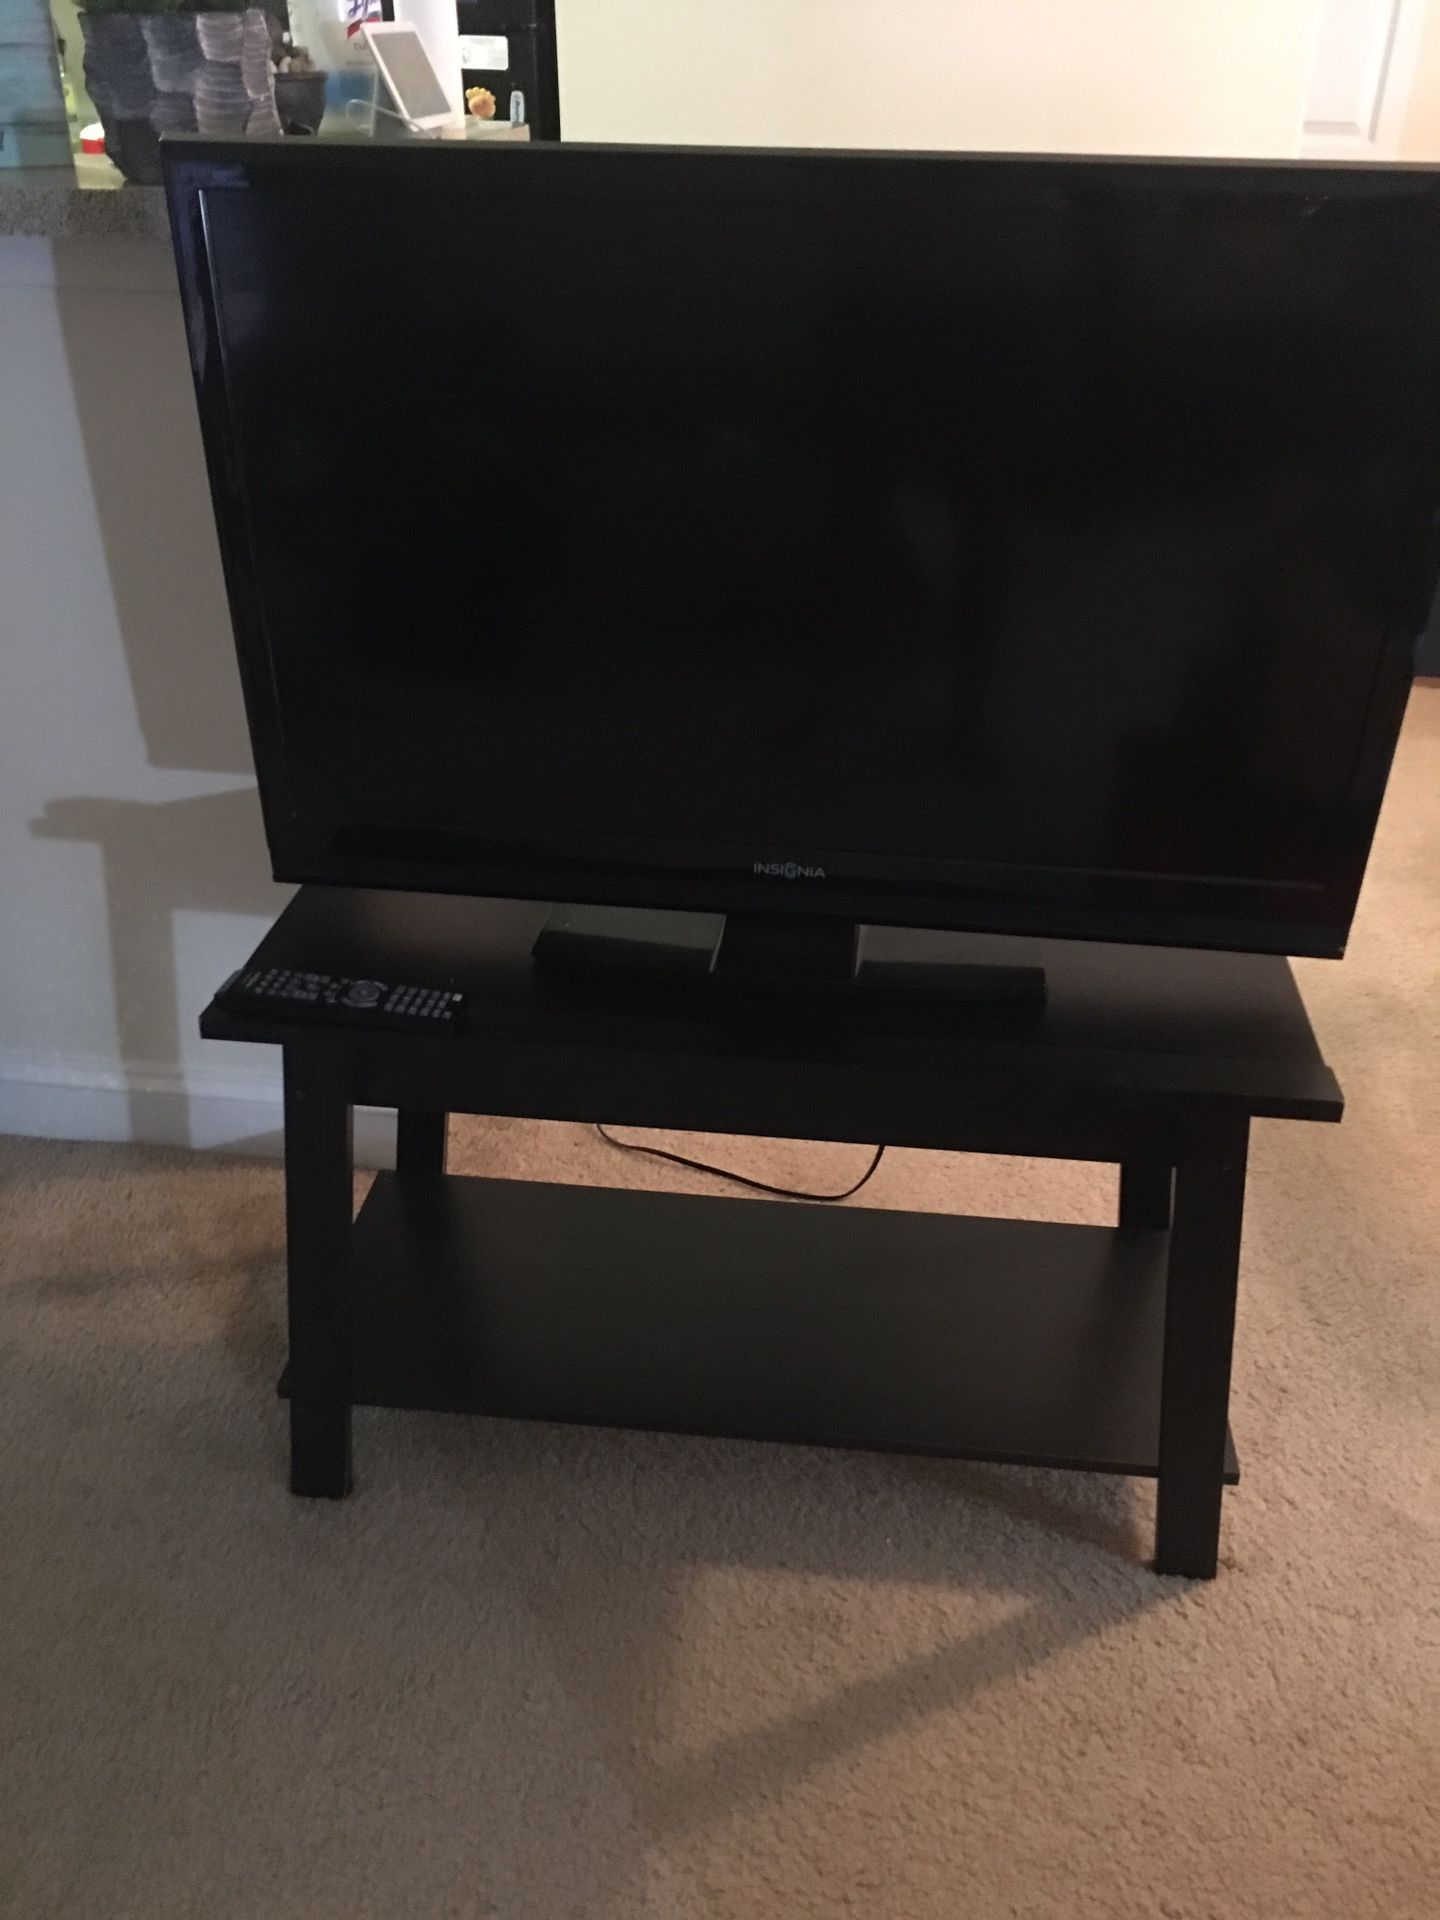 40 inch Insignia TV with Tv stand works perfect selling due to new bigger TV